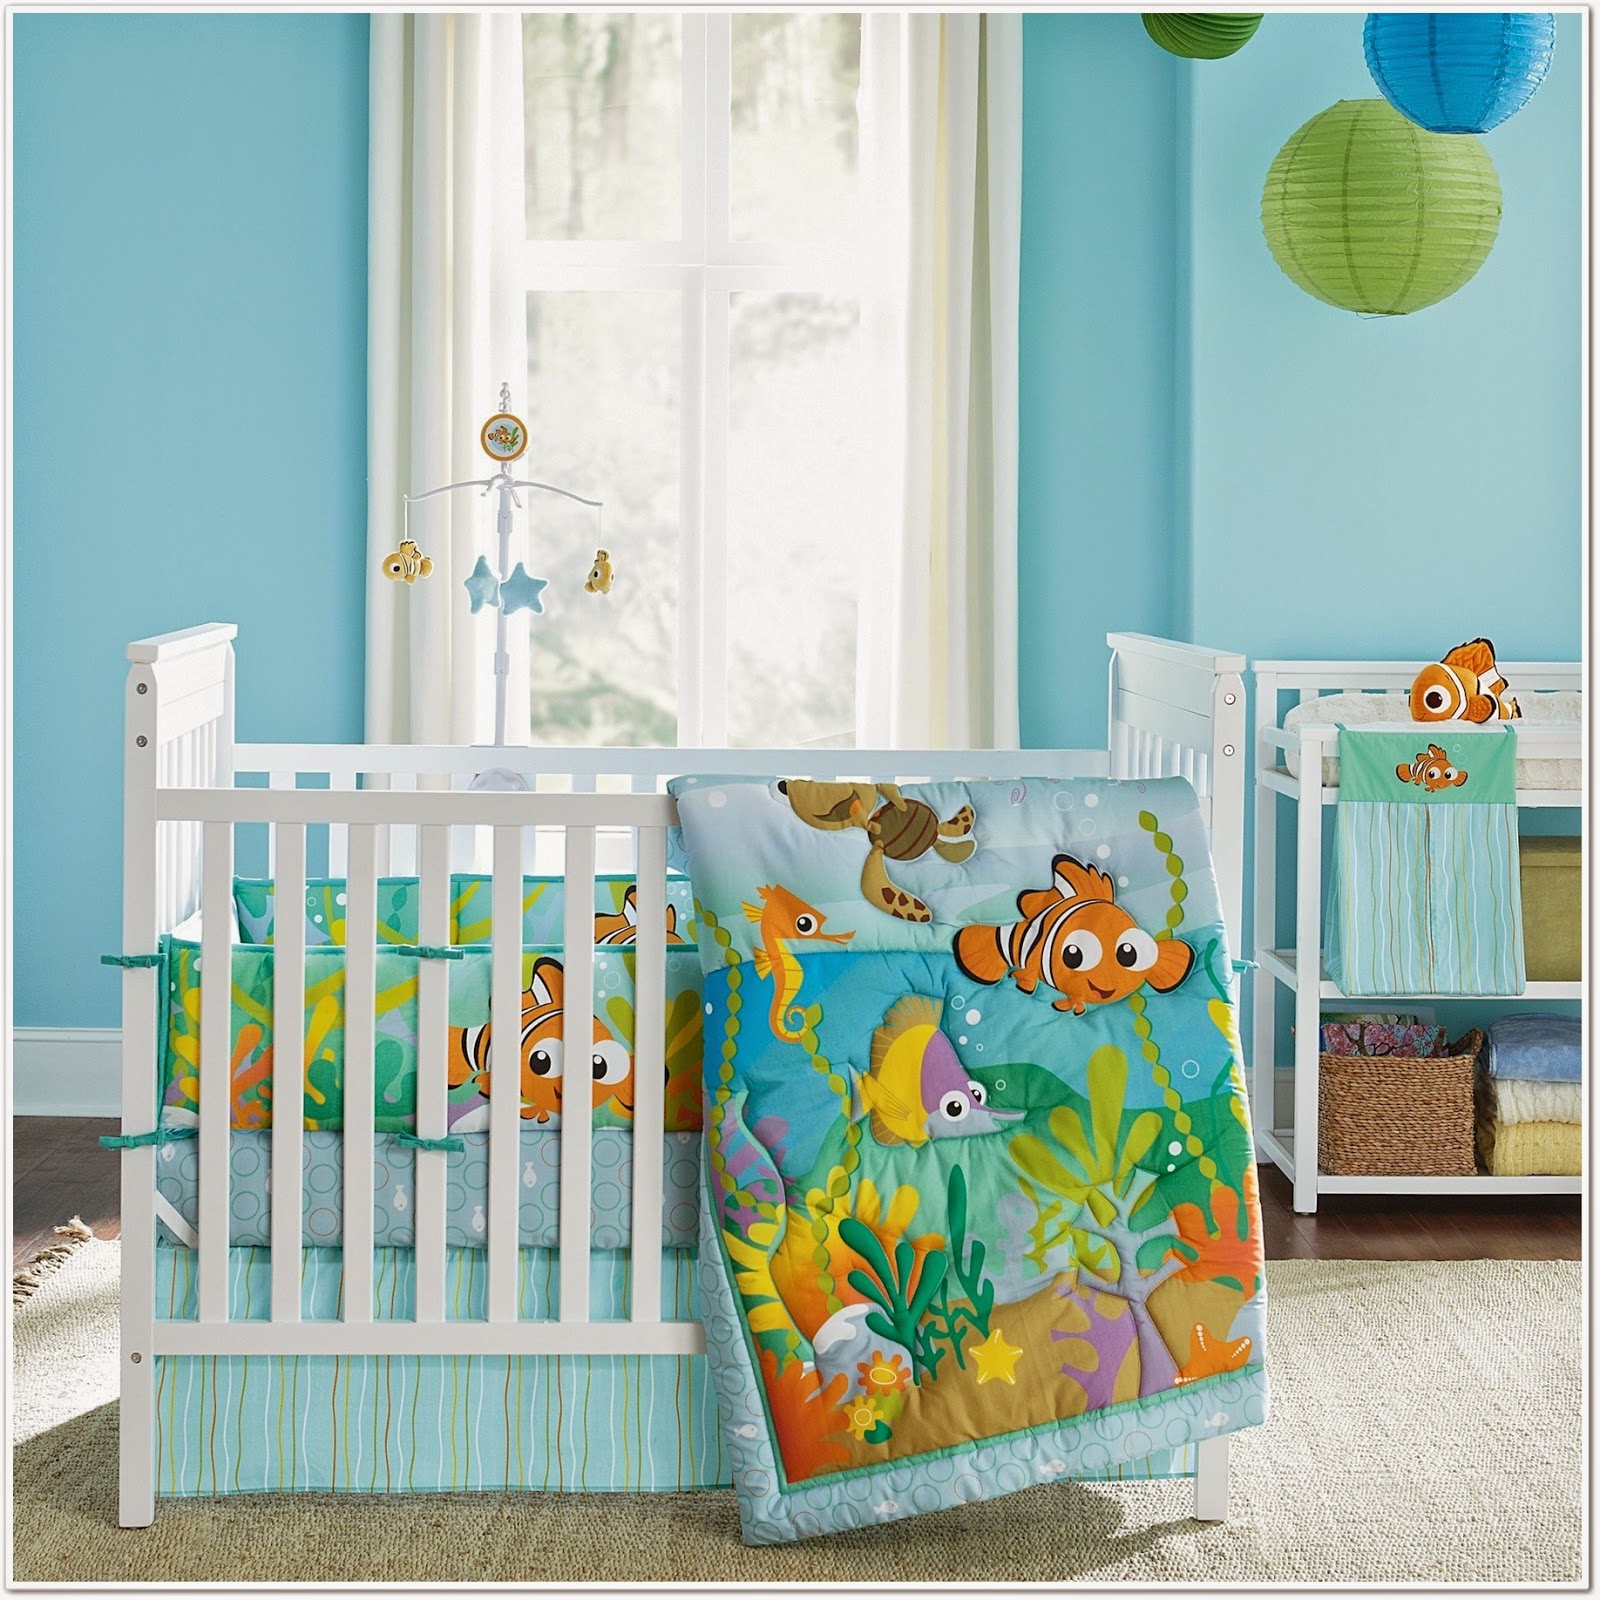 Decorate Your Baby Room With Nursery Furniture Sets